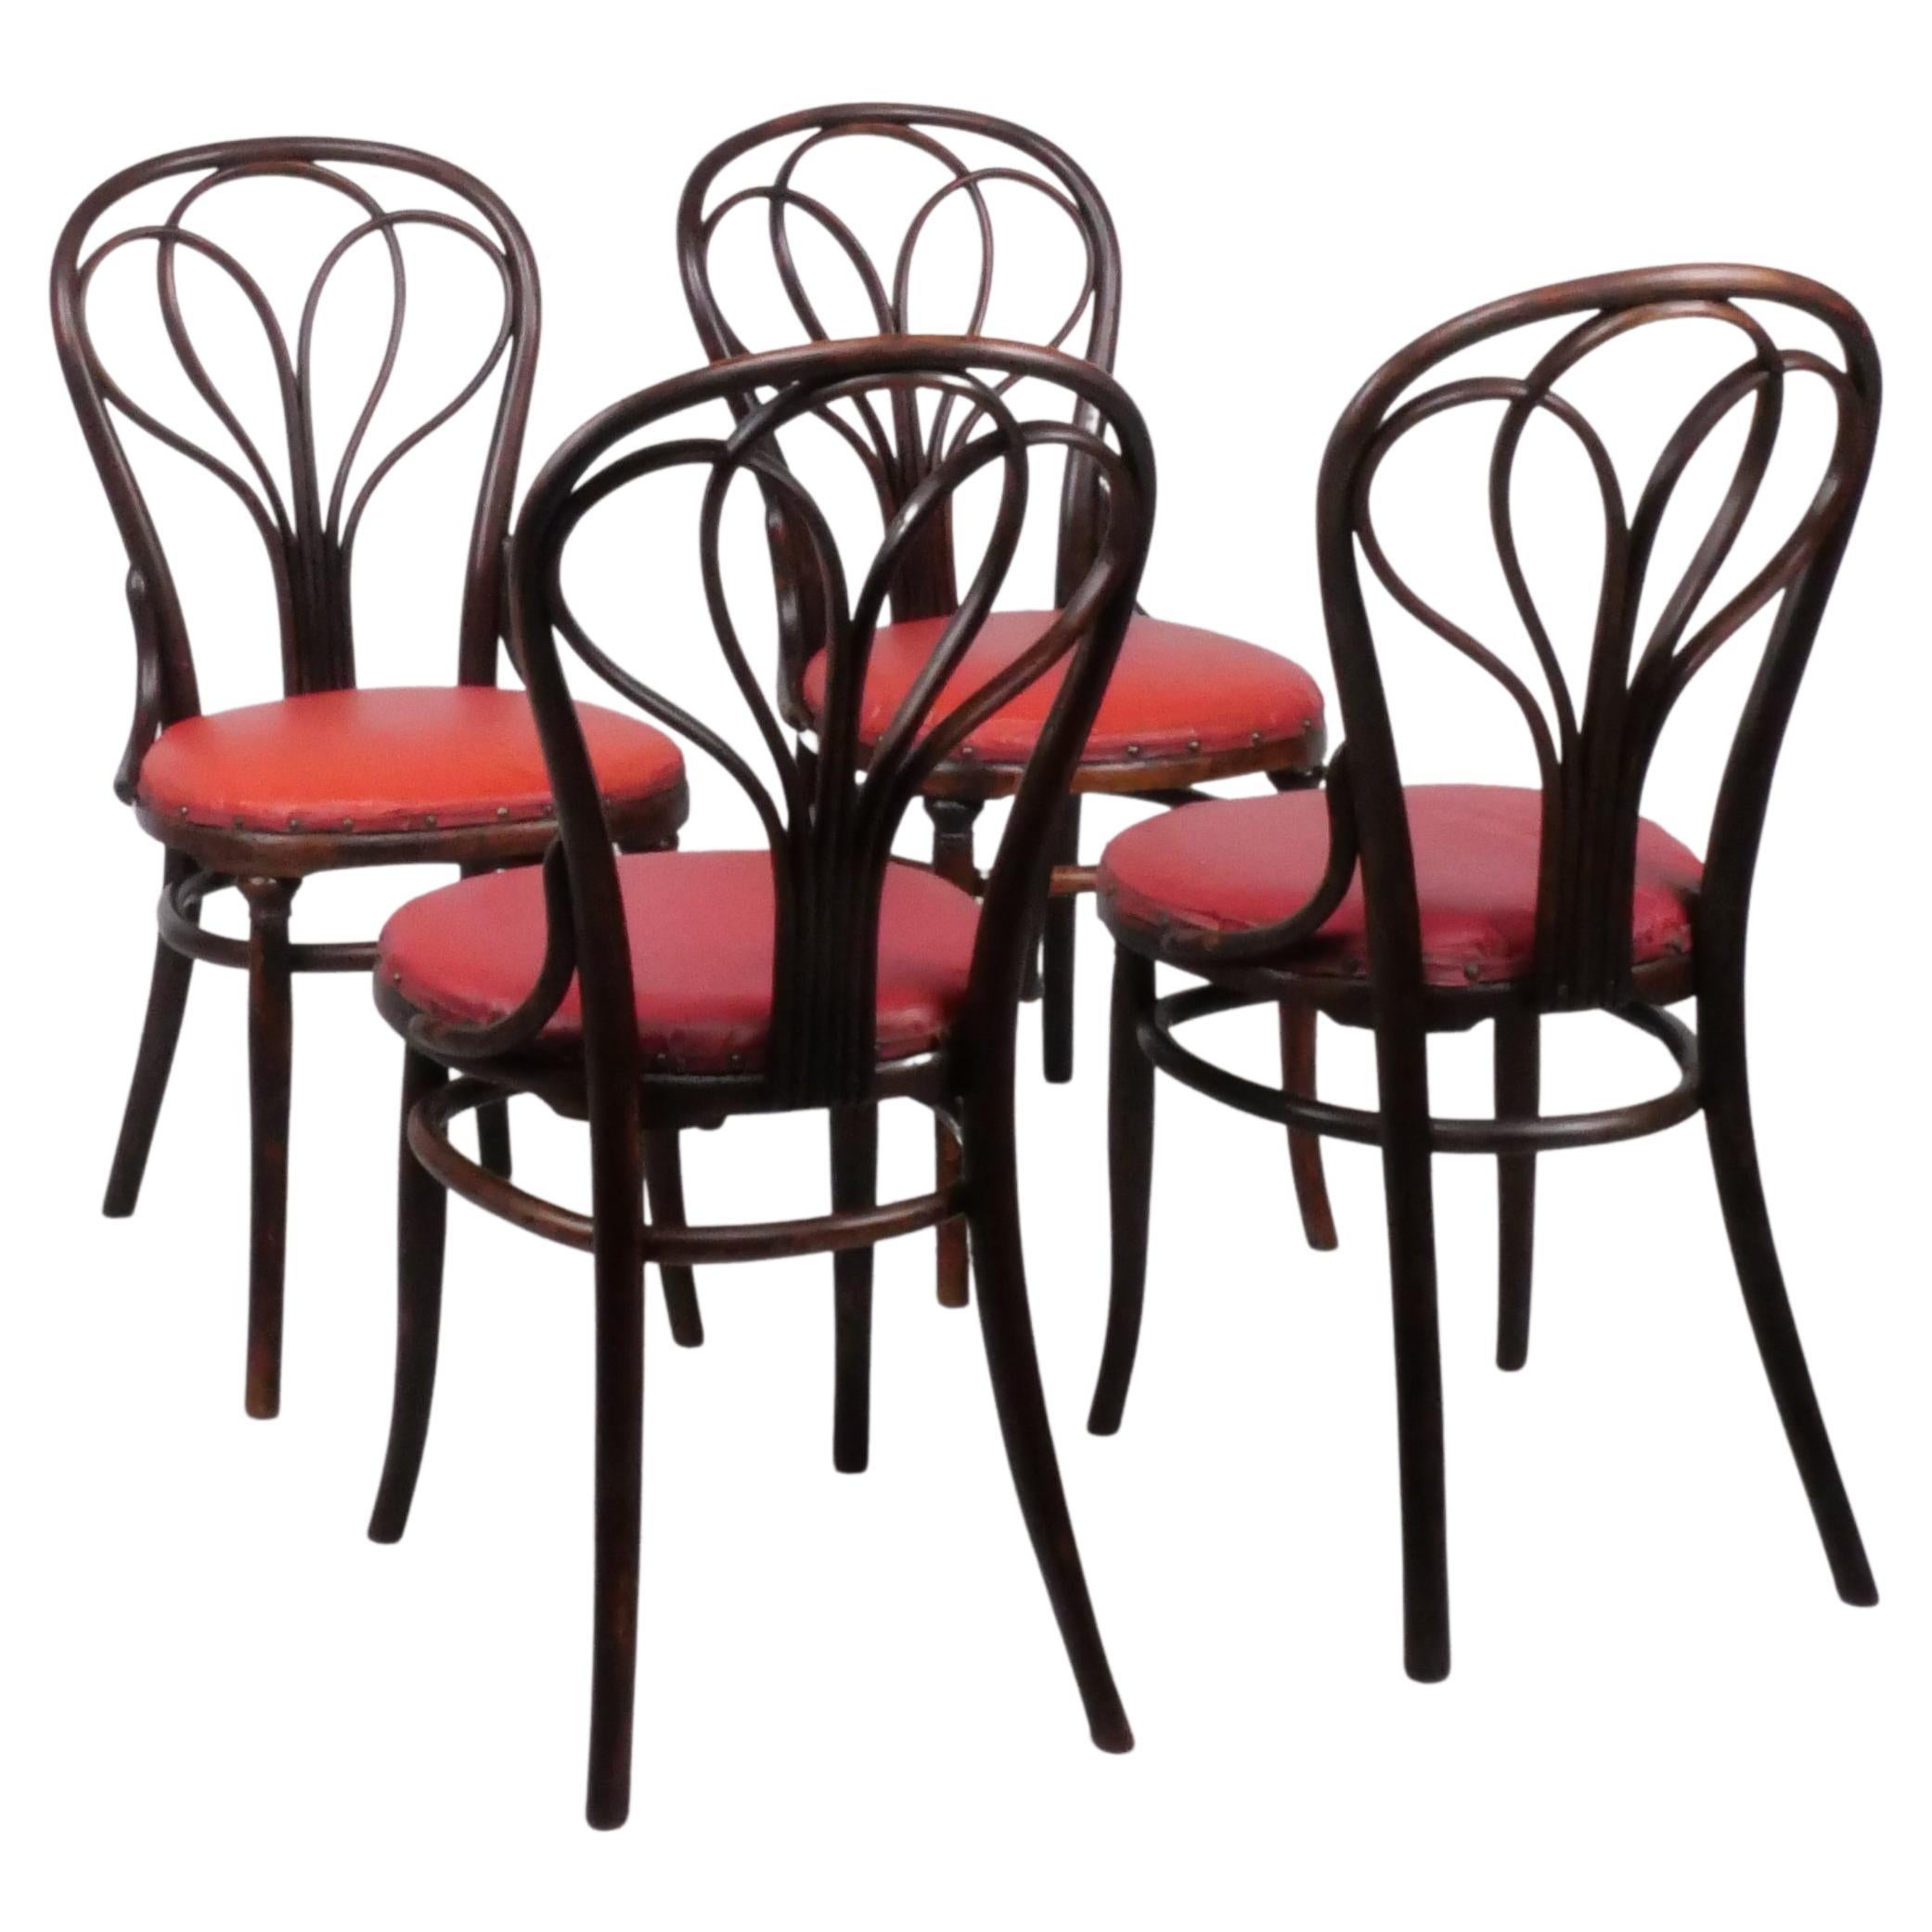 Set of 4 no.25 dining chairs by Gebrüder Thonet, c. 1870